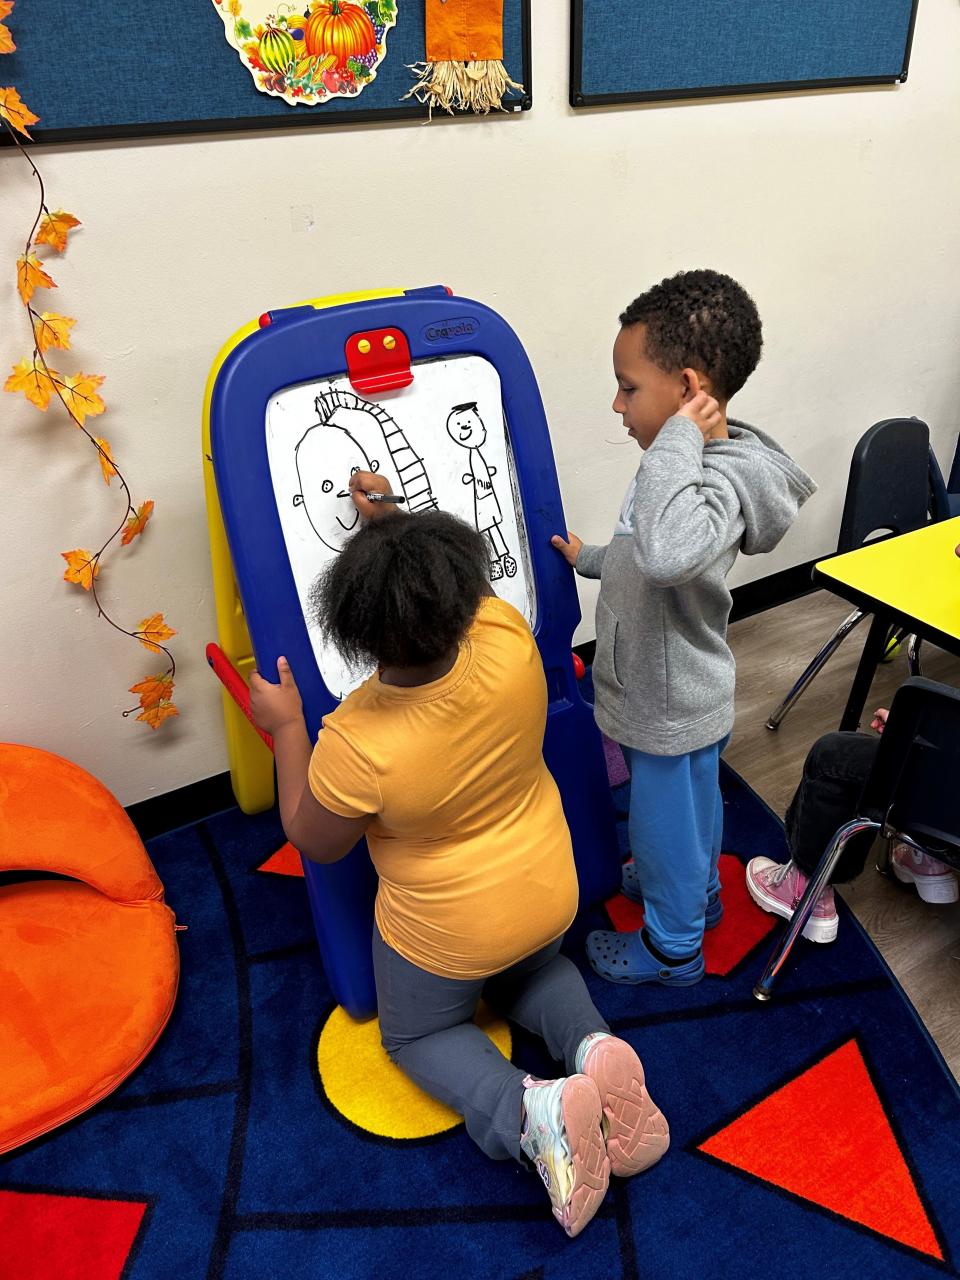 The MLK Youth Center in Bridgewater serves underprivileged kids ages 5 to 13, with hopes they gain academic and professional skills.